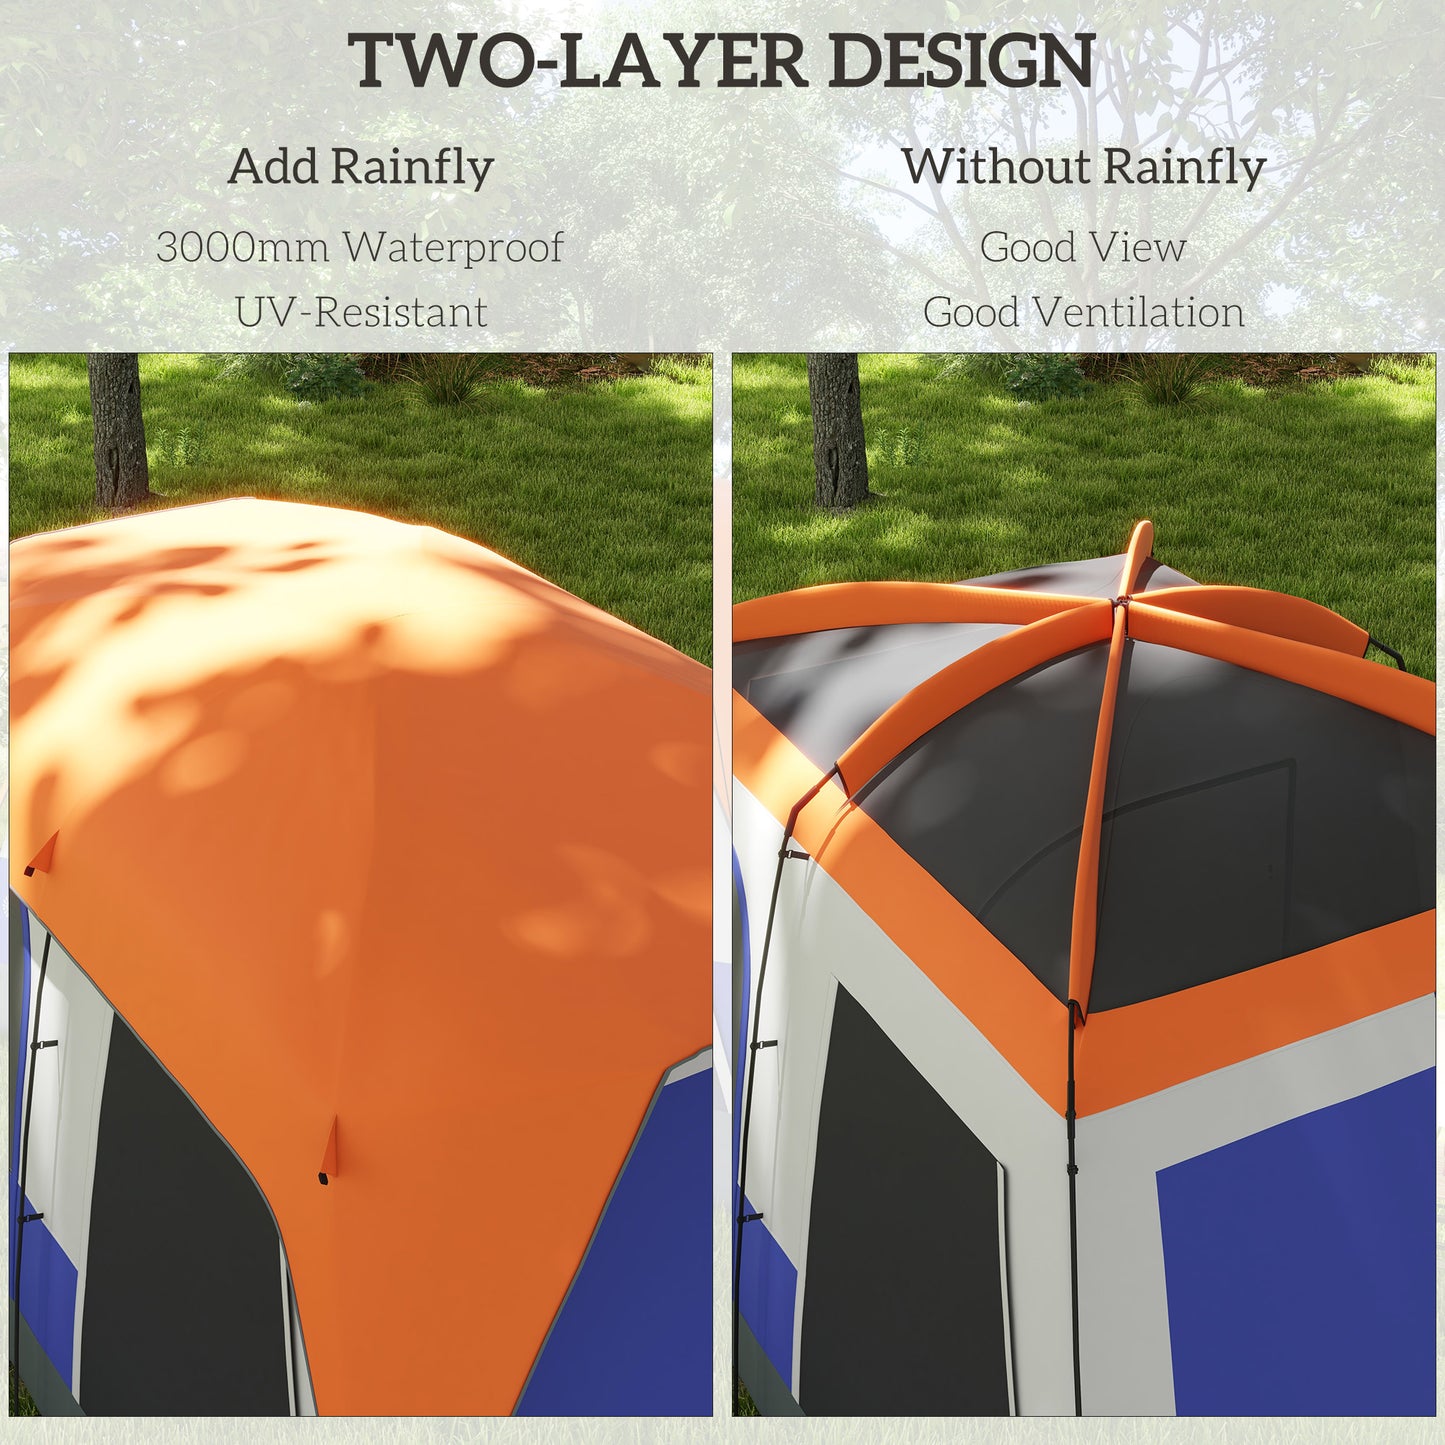 Outsunny Seven-Man Camping Tent with Small Rainfly and Accessories - Orange